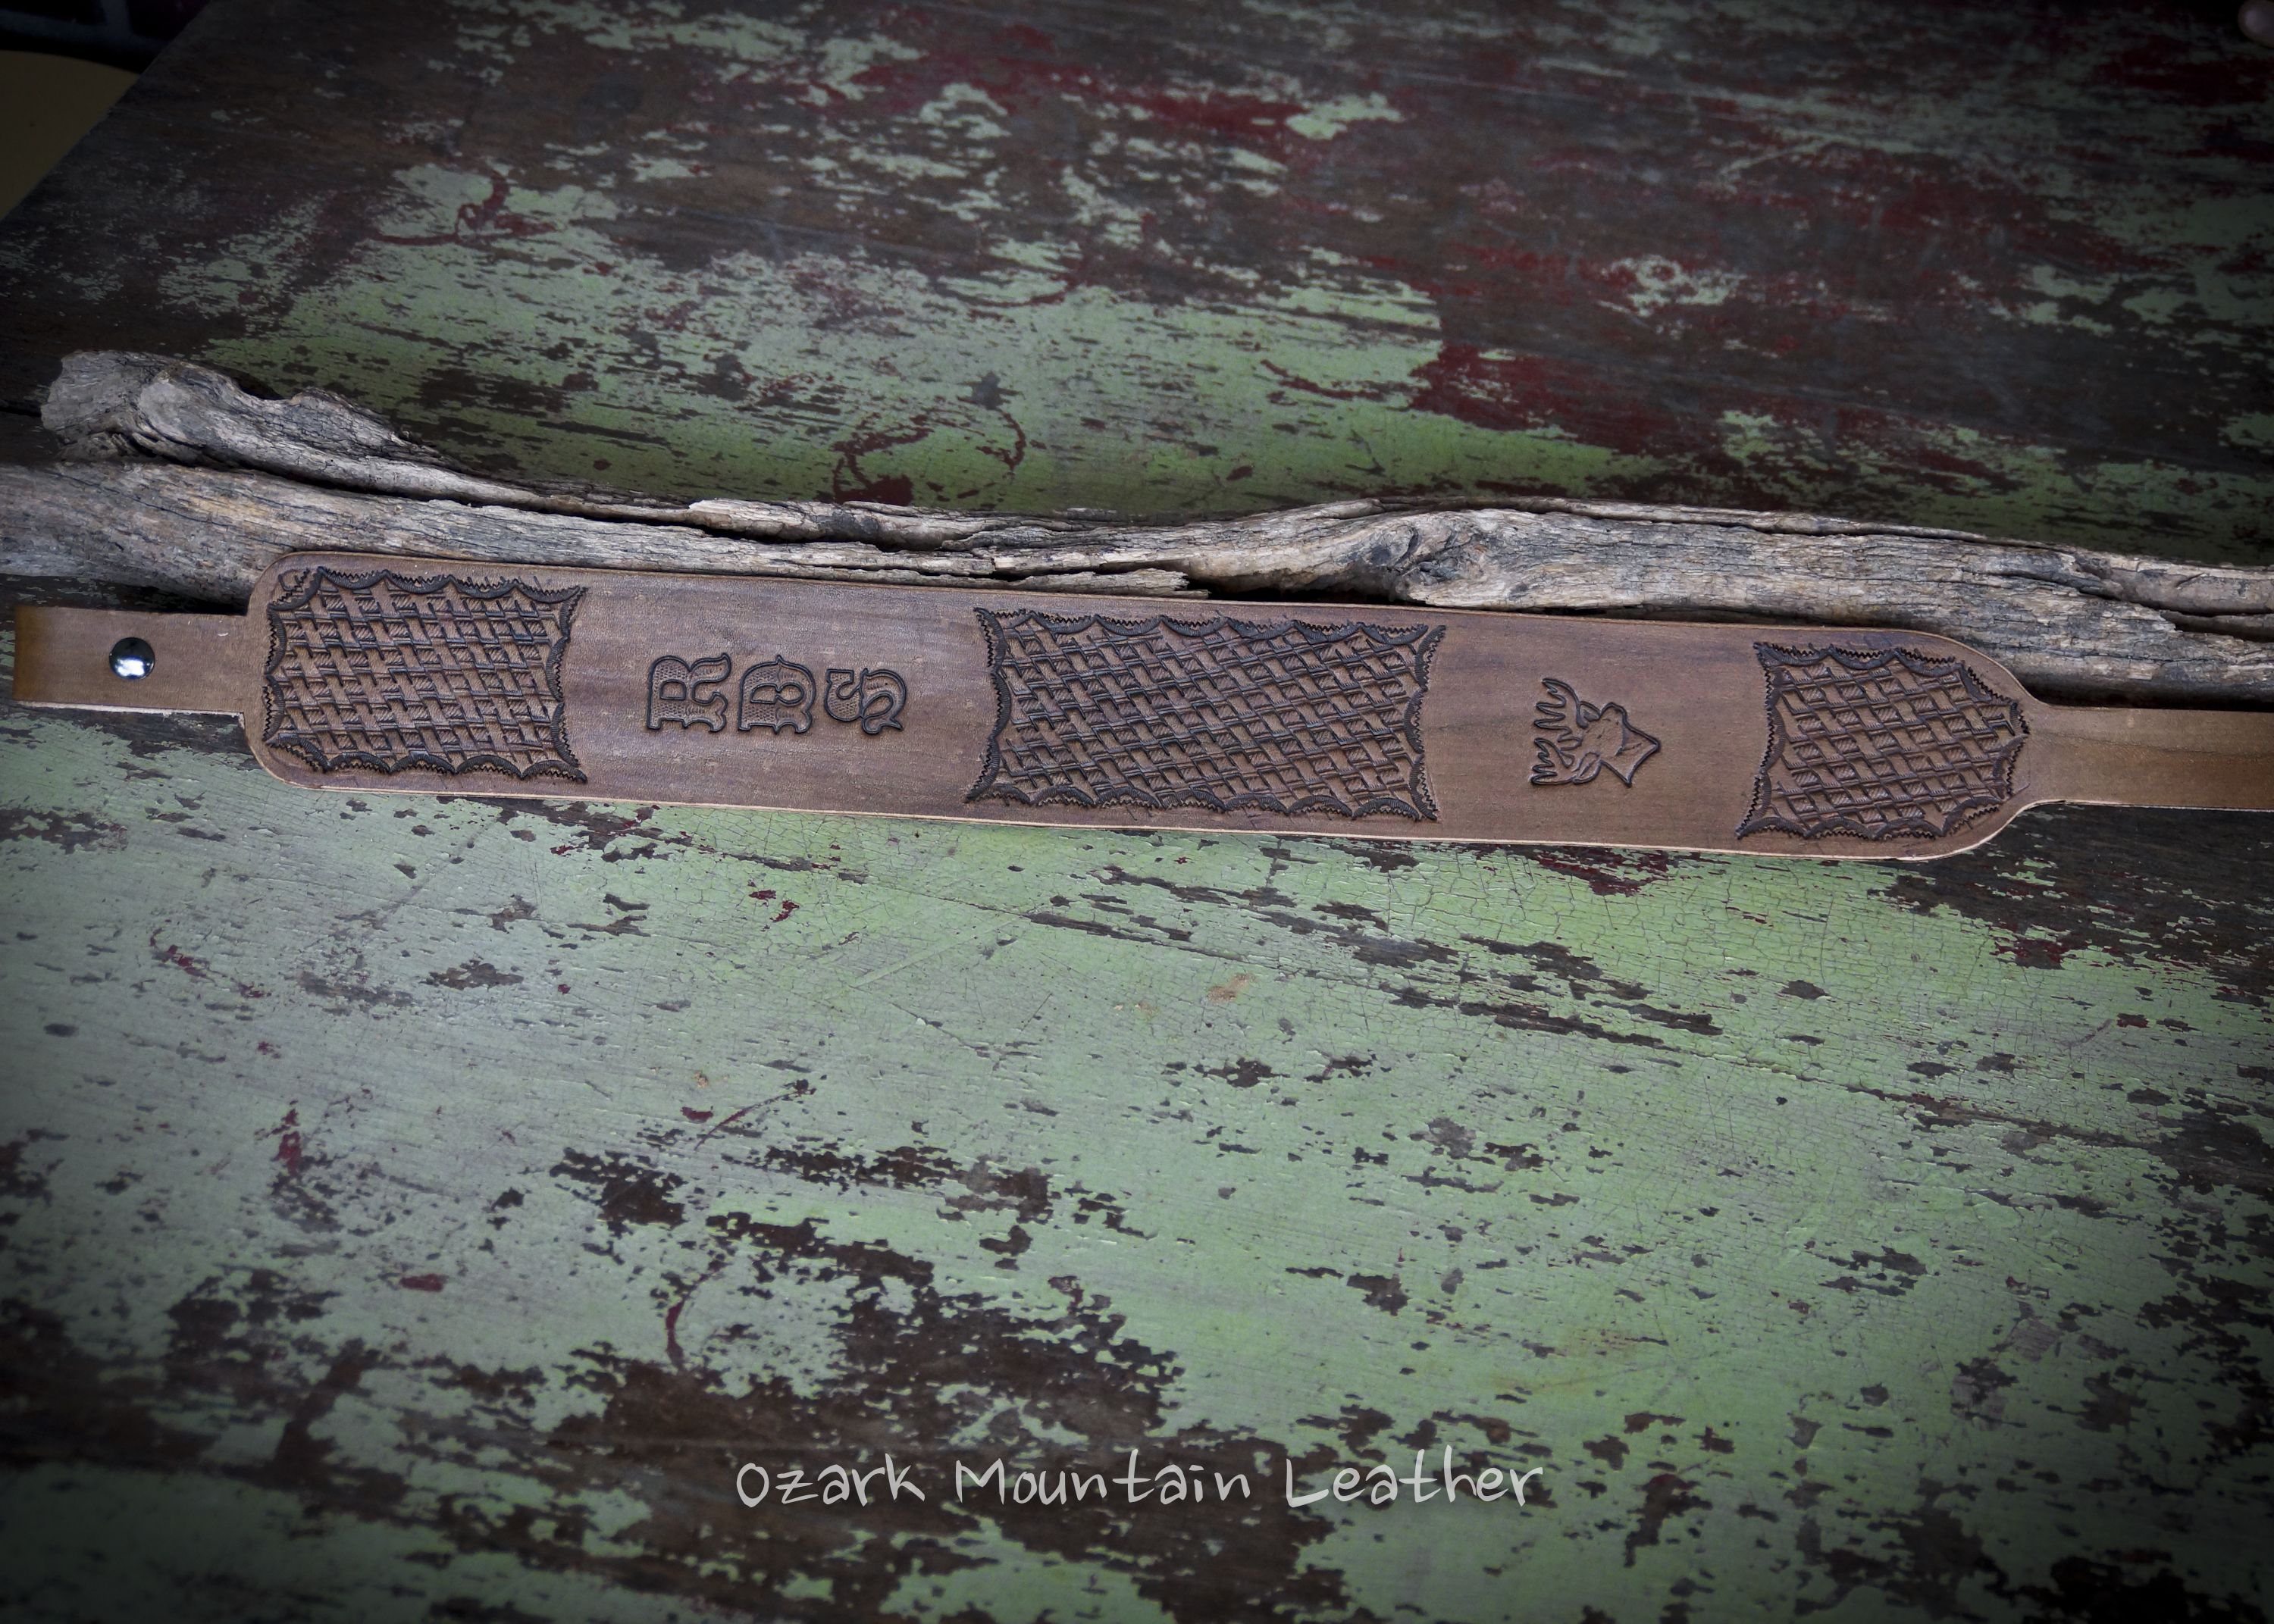 Buy Handmade Customized Vegetable Tanned Leather Rifle Sling Or Gun Sling  Hand Tooled Slim Style., made to order from Ozark Mountain Leather